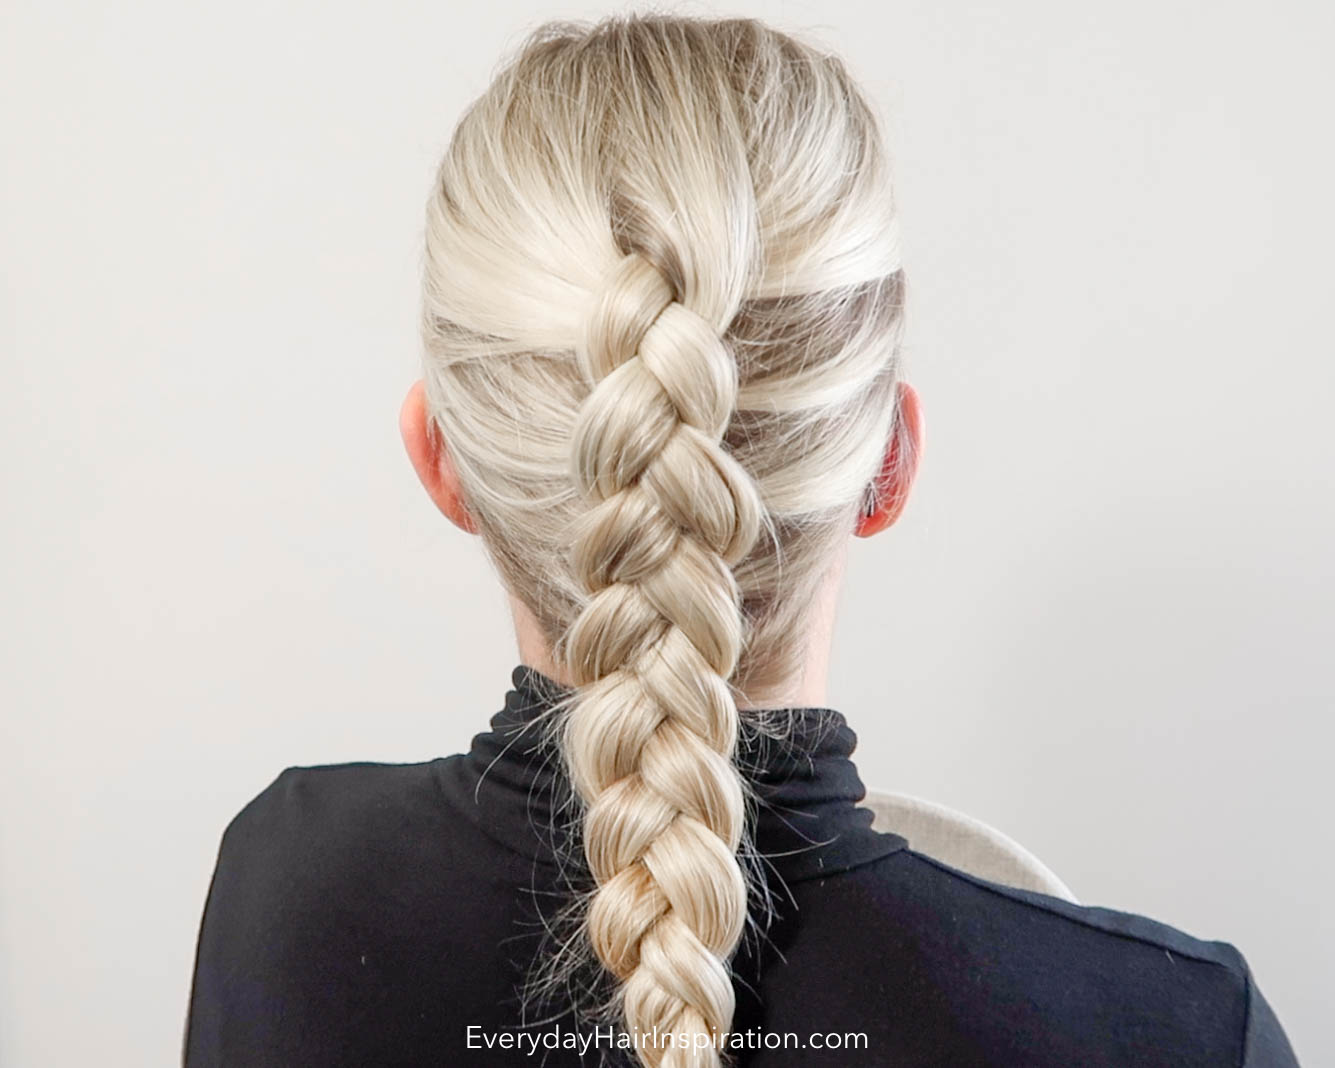 How To Dutch Braid Your Own Hair Hand Placements How To Add Hair And More Everyday Hair 